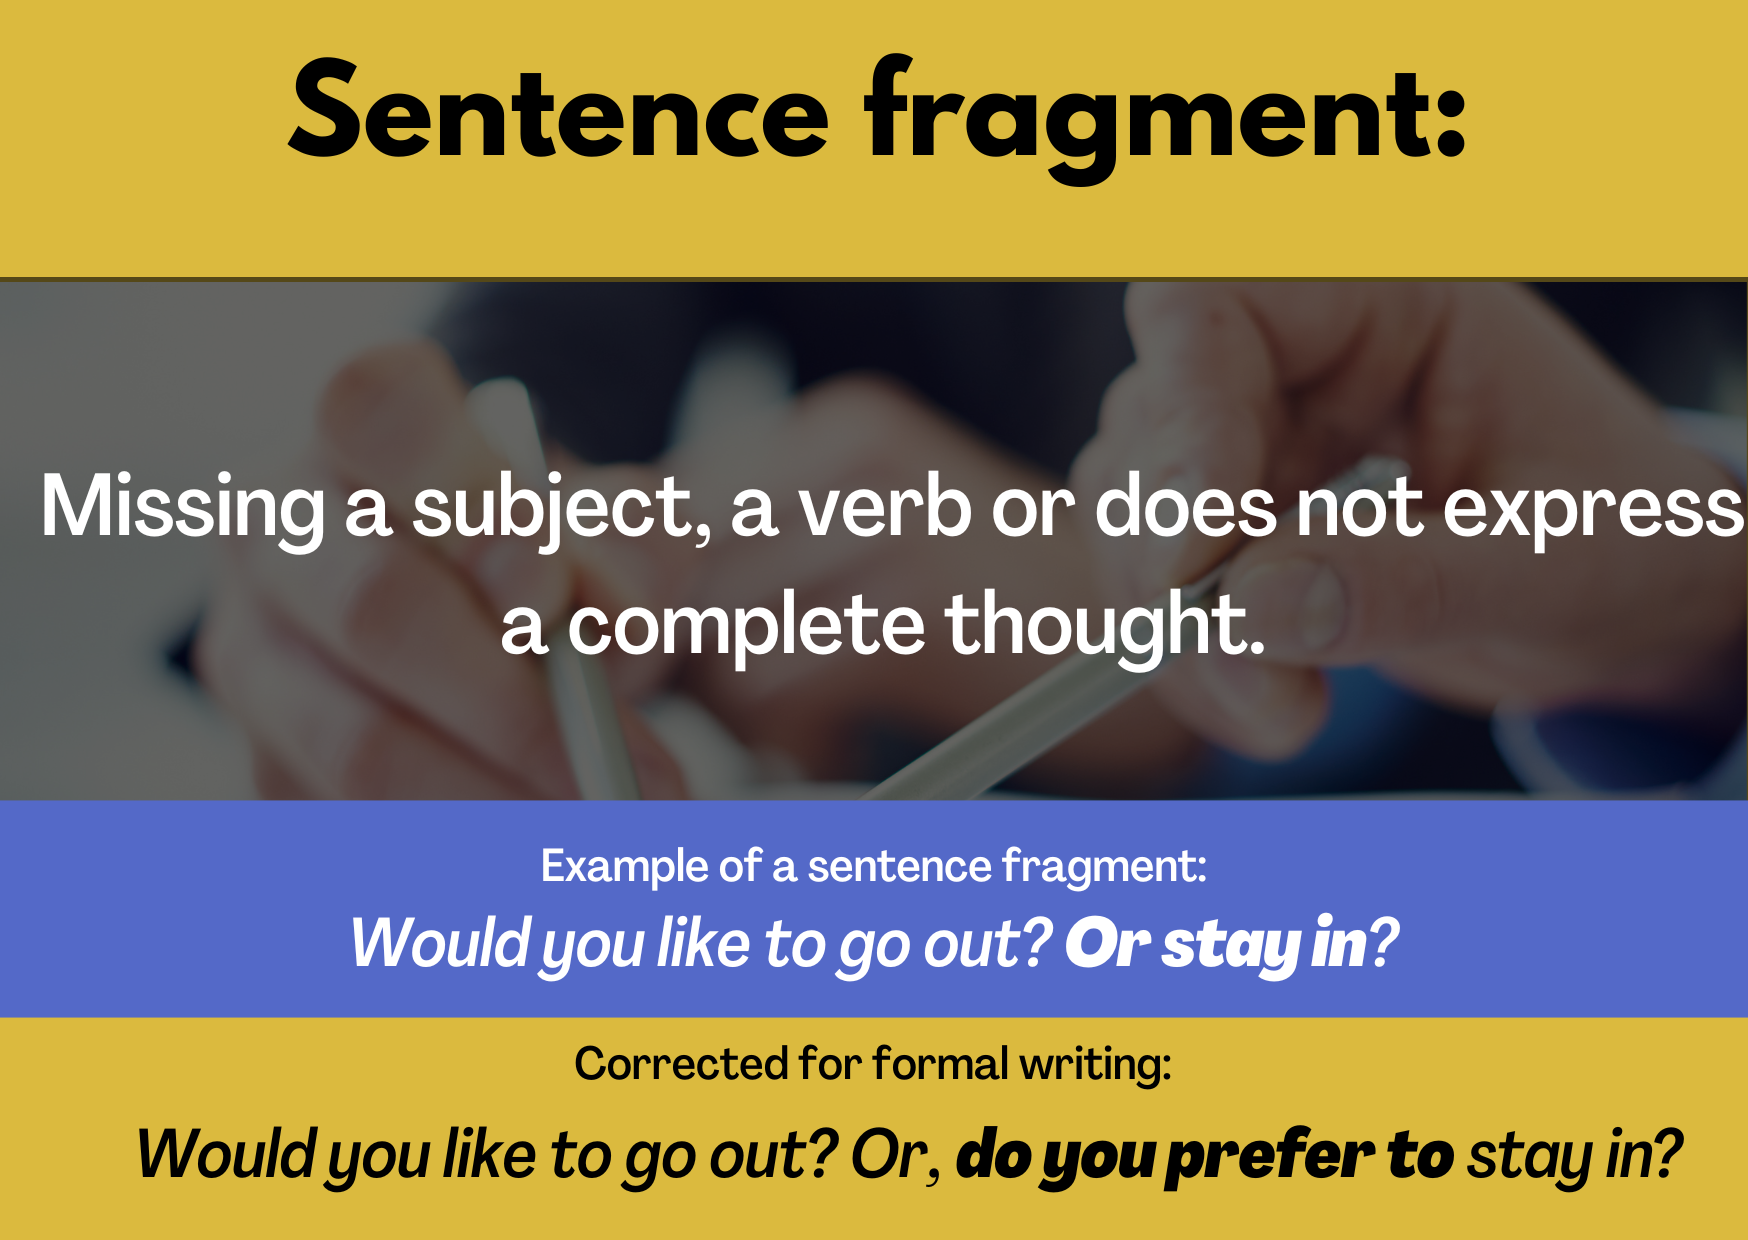 A graphic explaining a sentence fragment: missing a subject, a verb or does not express a complete thought." Example of a sentence fragment: "Would you like to go out? OR STAY IN?" Corrected for formal writing: "Would you like to go out? Or, do you prefer to stay in?"